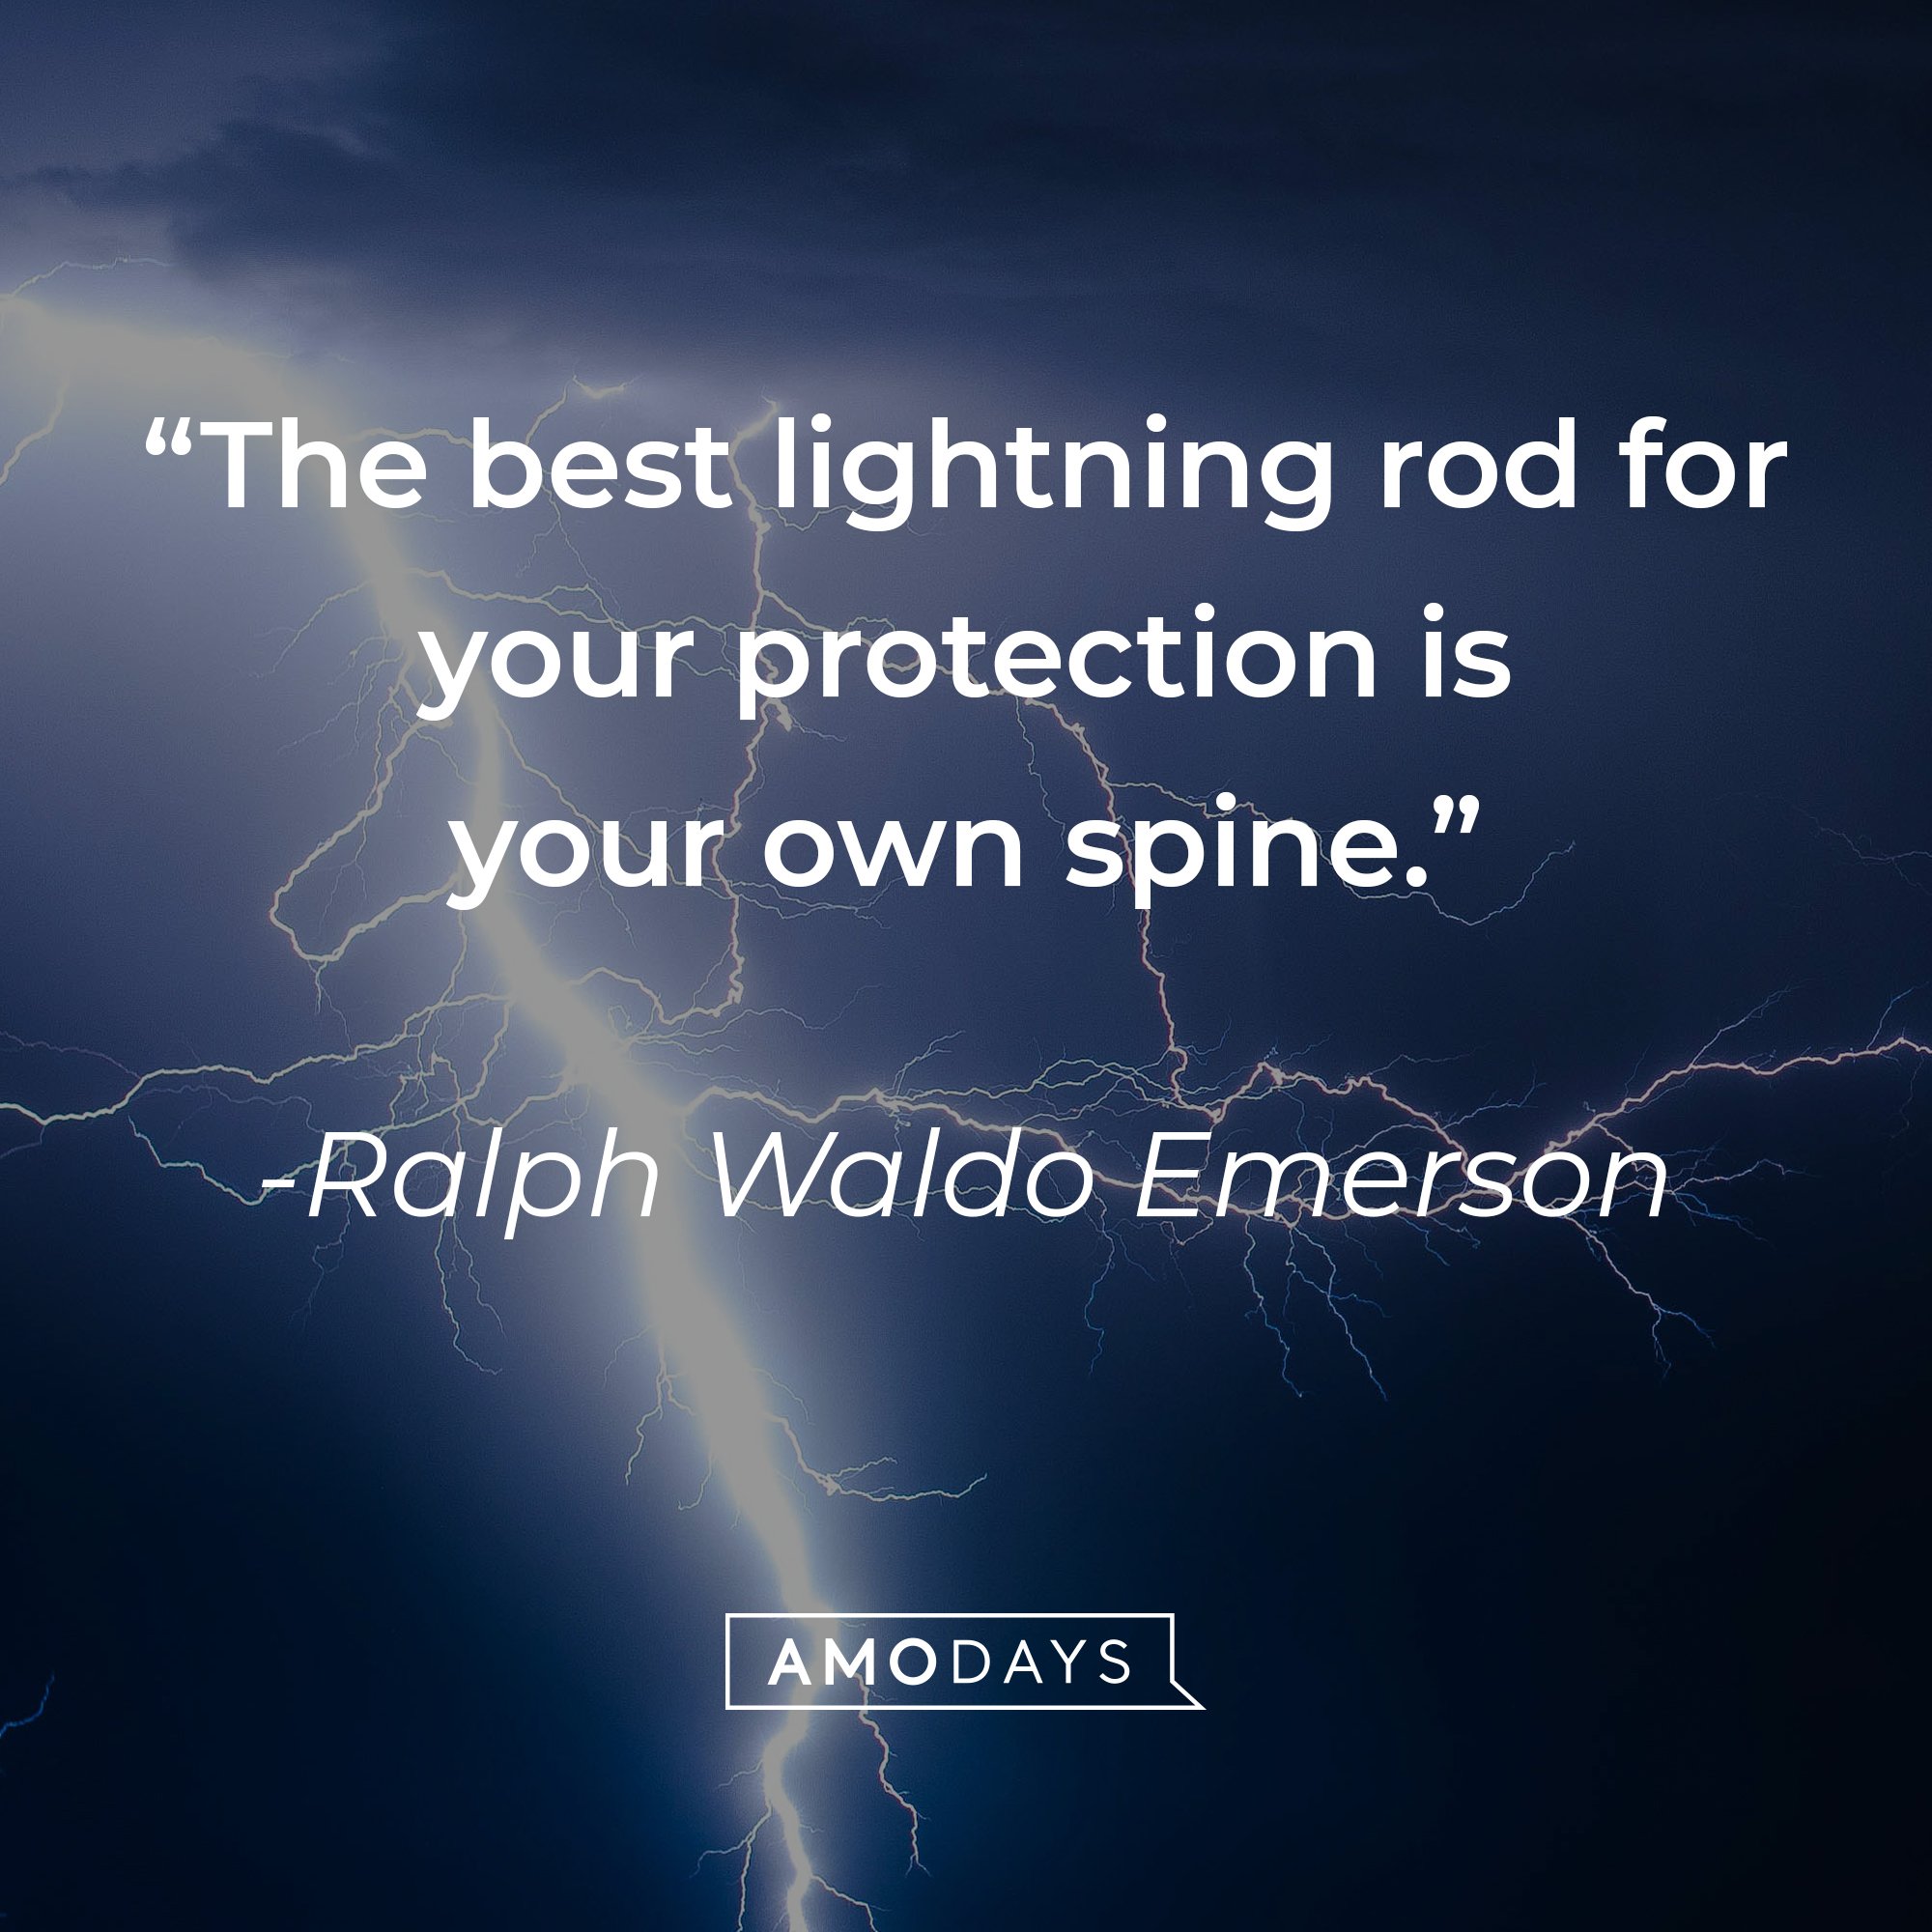 Ralph Waldo Emerson’s quote: "The best lightning rod for your protection is your own spine." | Image: AmoDays  